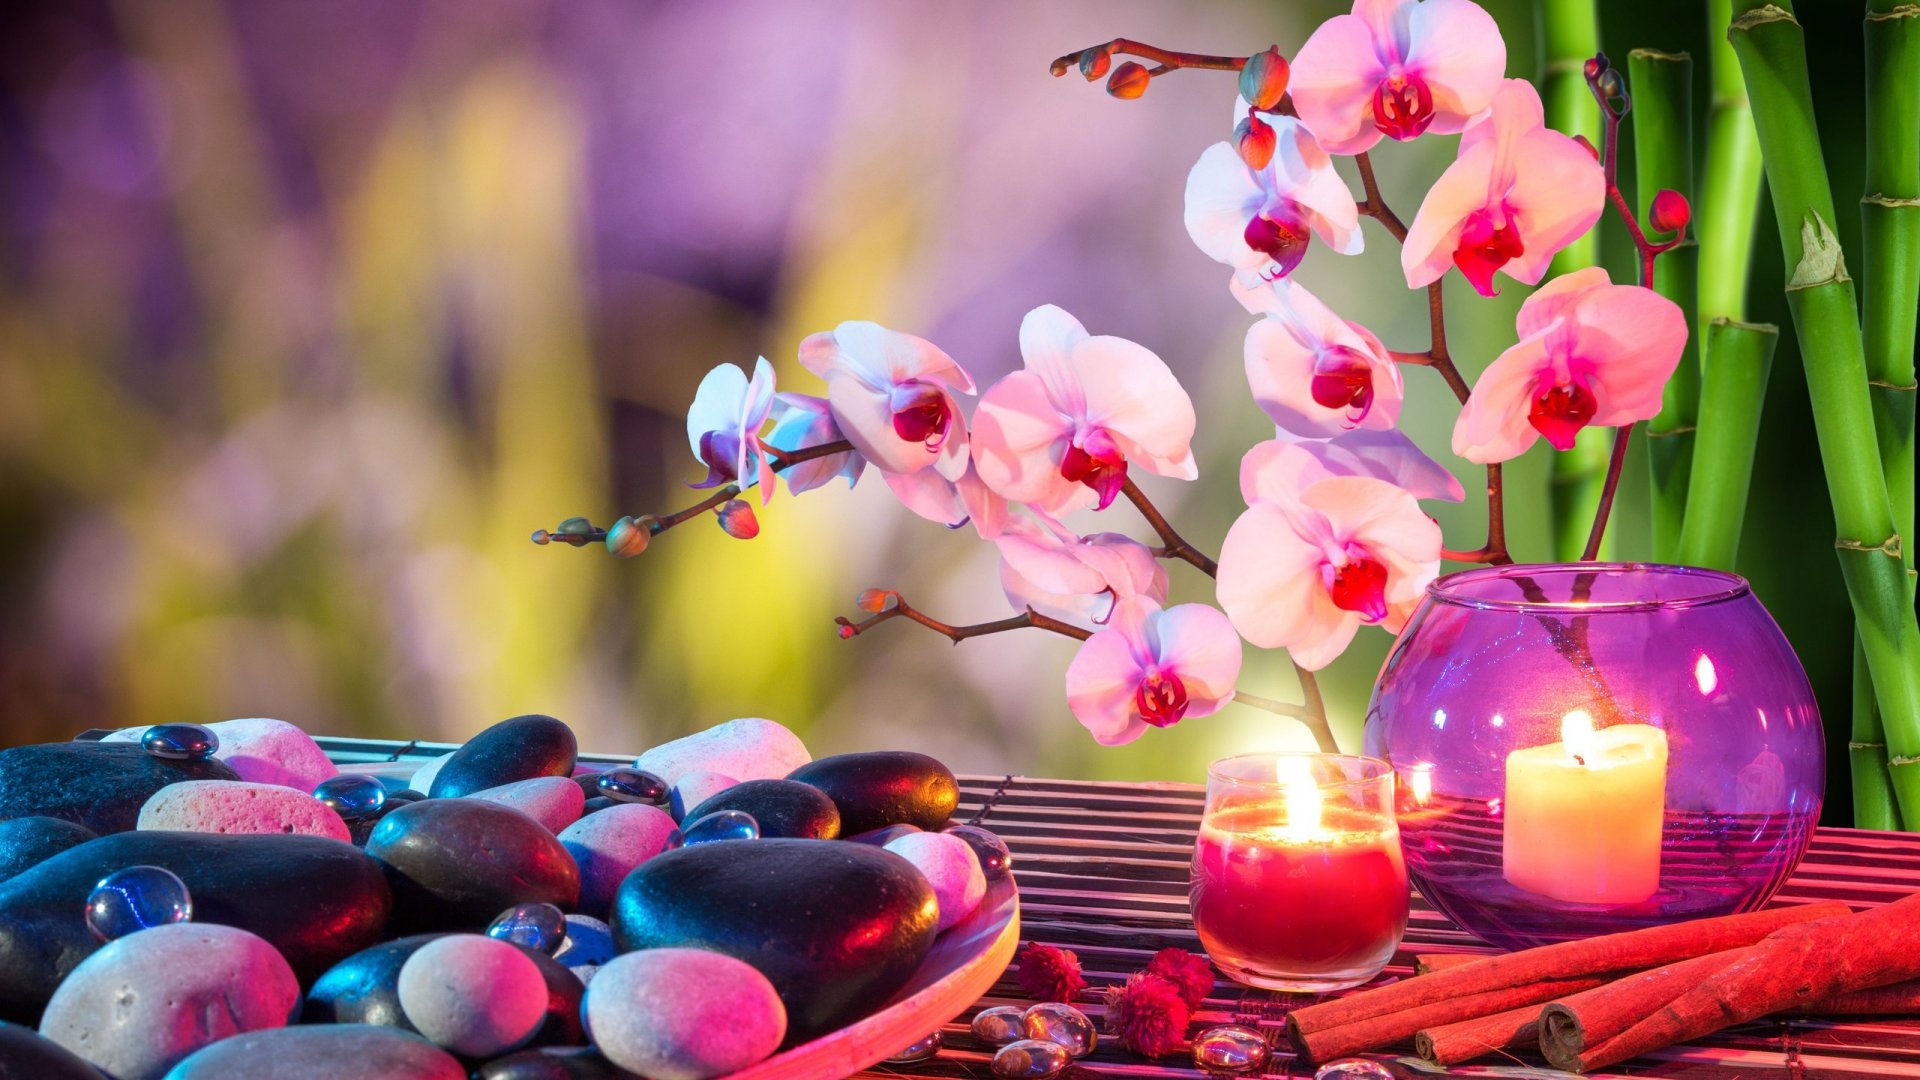 Orchids Candles Stones Wallpaper 1920x1080